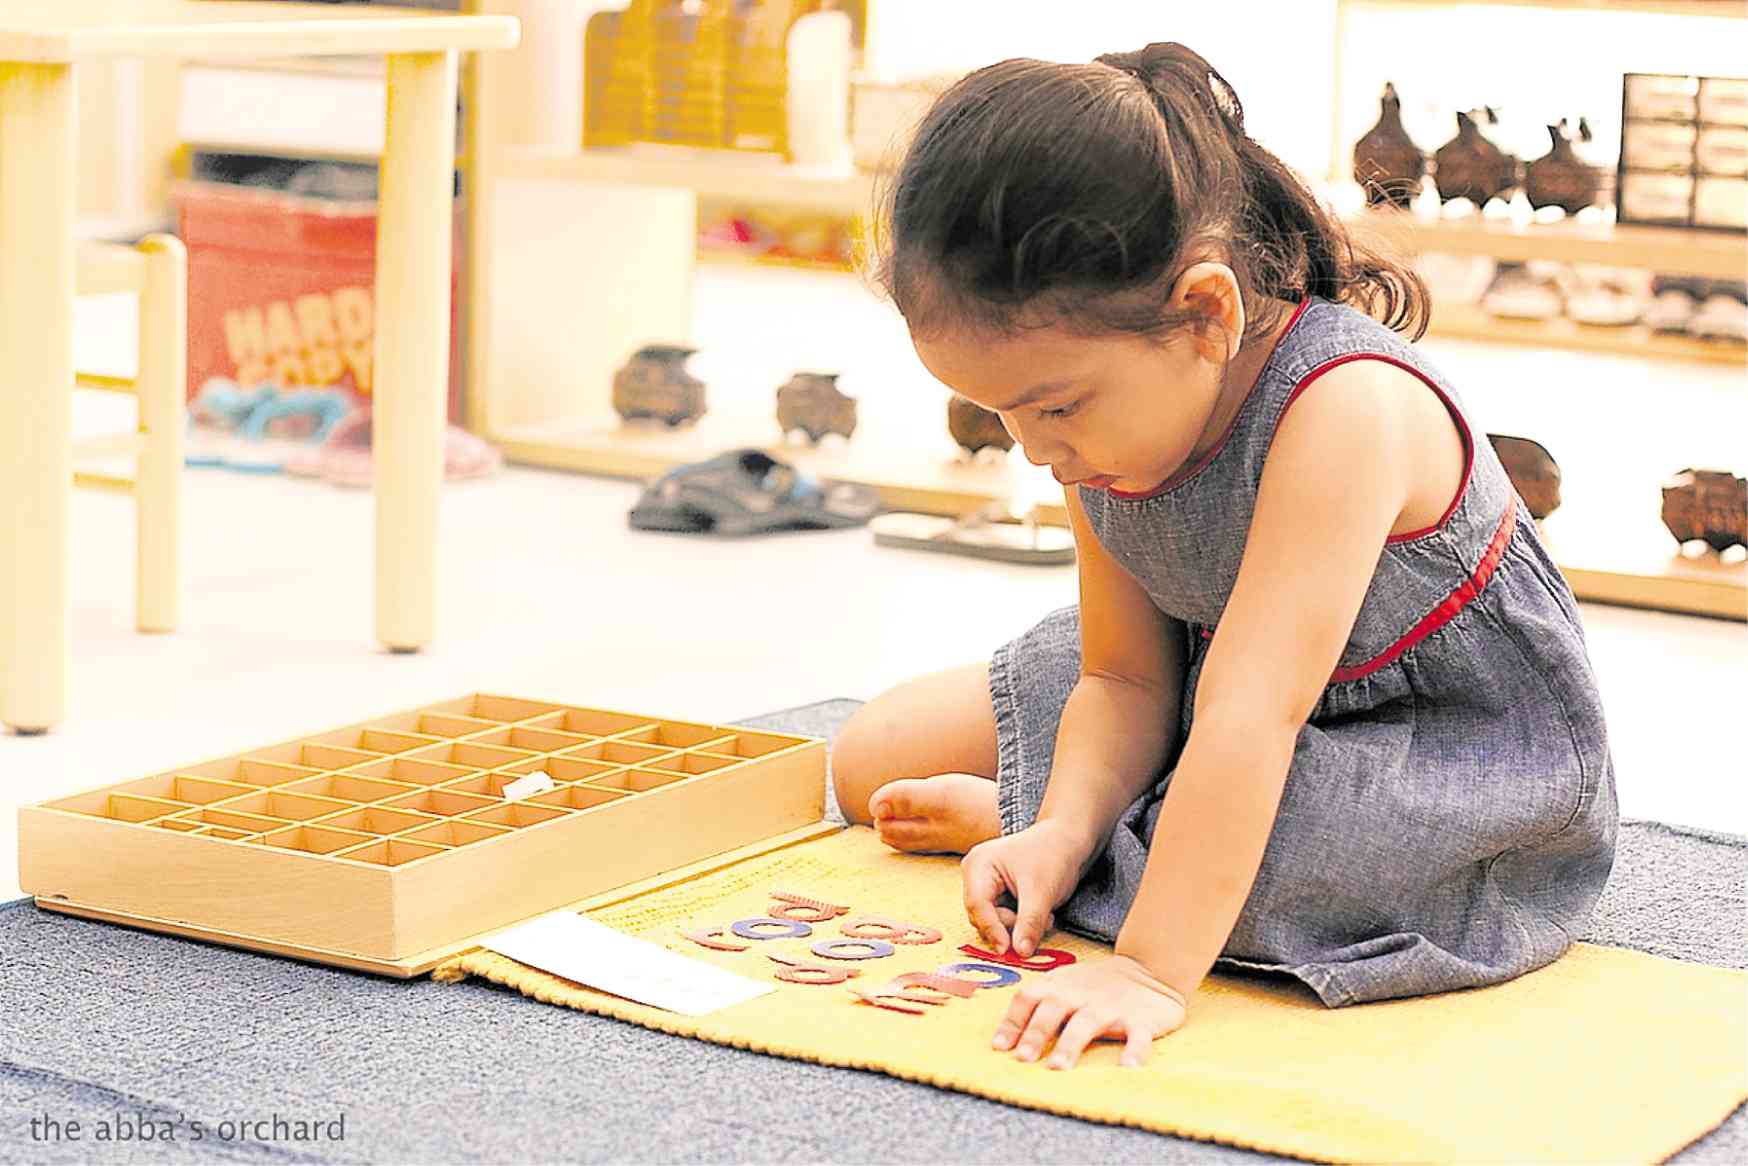 No mere child’s play: Study shows preschool pays off big later